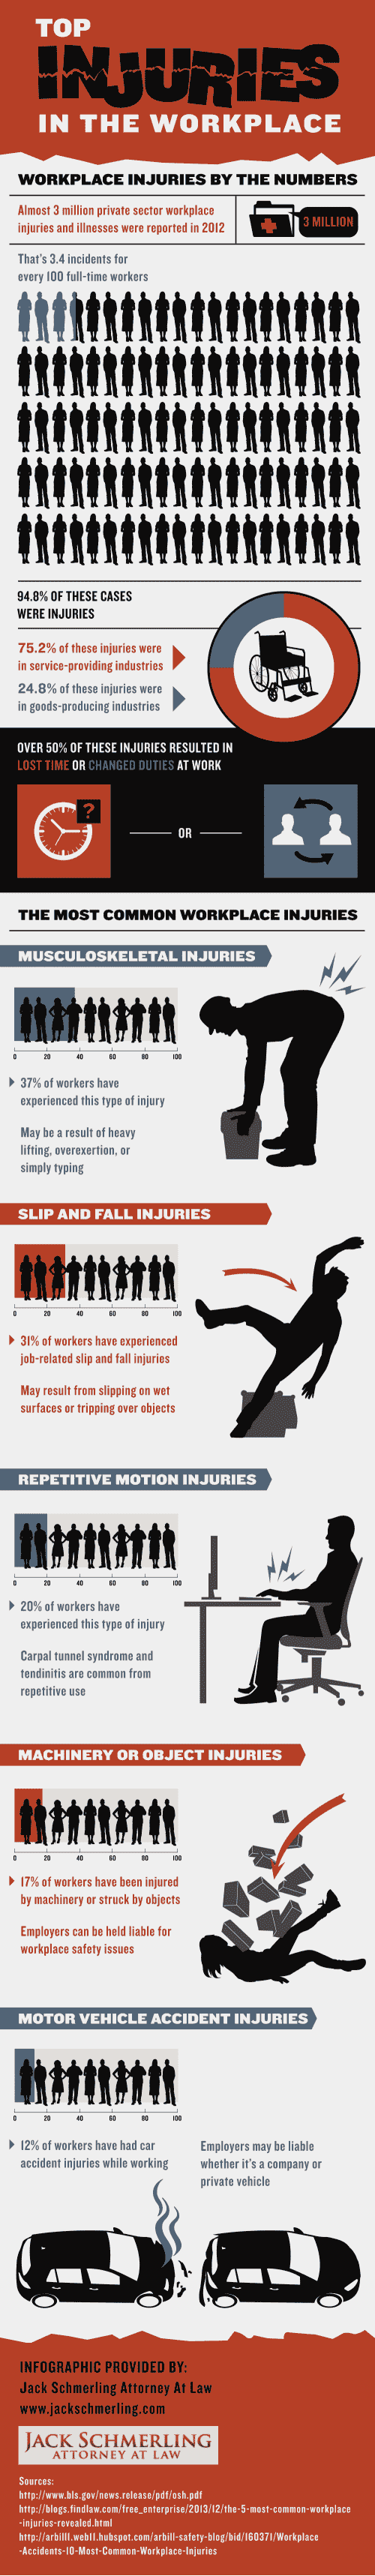 Top Injuries in the Workplace